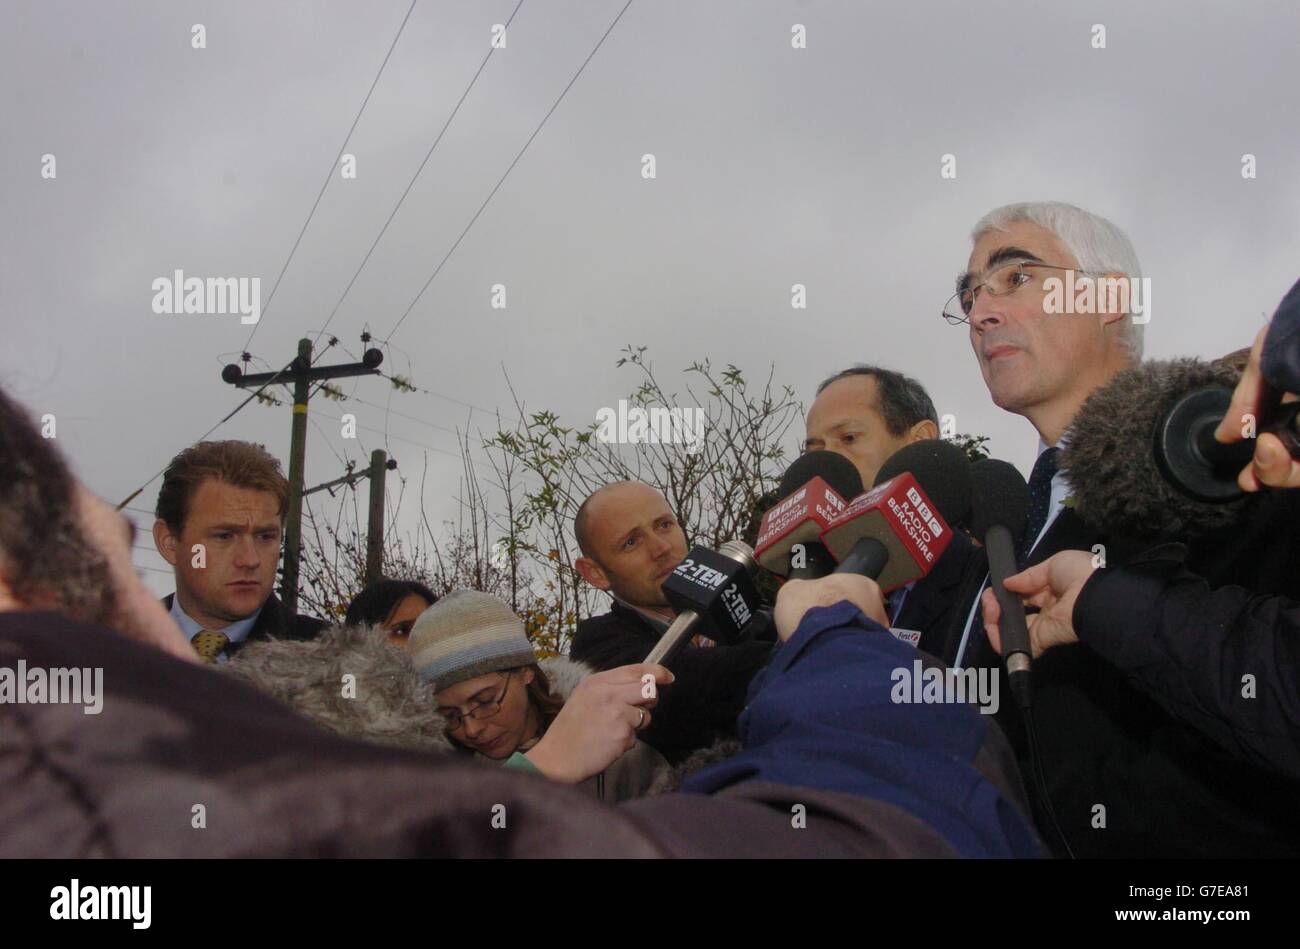 The Transport Secretary Alistair Darling (right) speaks to the press after visiting the scene of the mangled wreckage of the train which derailed after it had hit a car parked on a level crossing at Ufton Nervet in Berkshire. The crash, which has so far claimed seven lives, occurred after the train had left Reading bound for Plymouth. Stock Photo